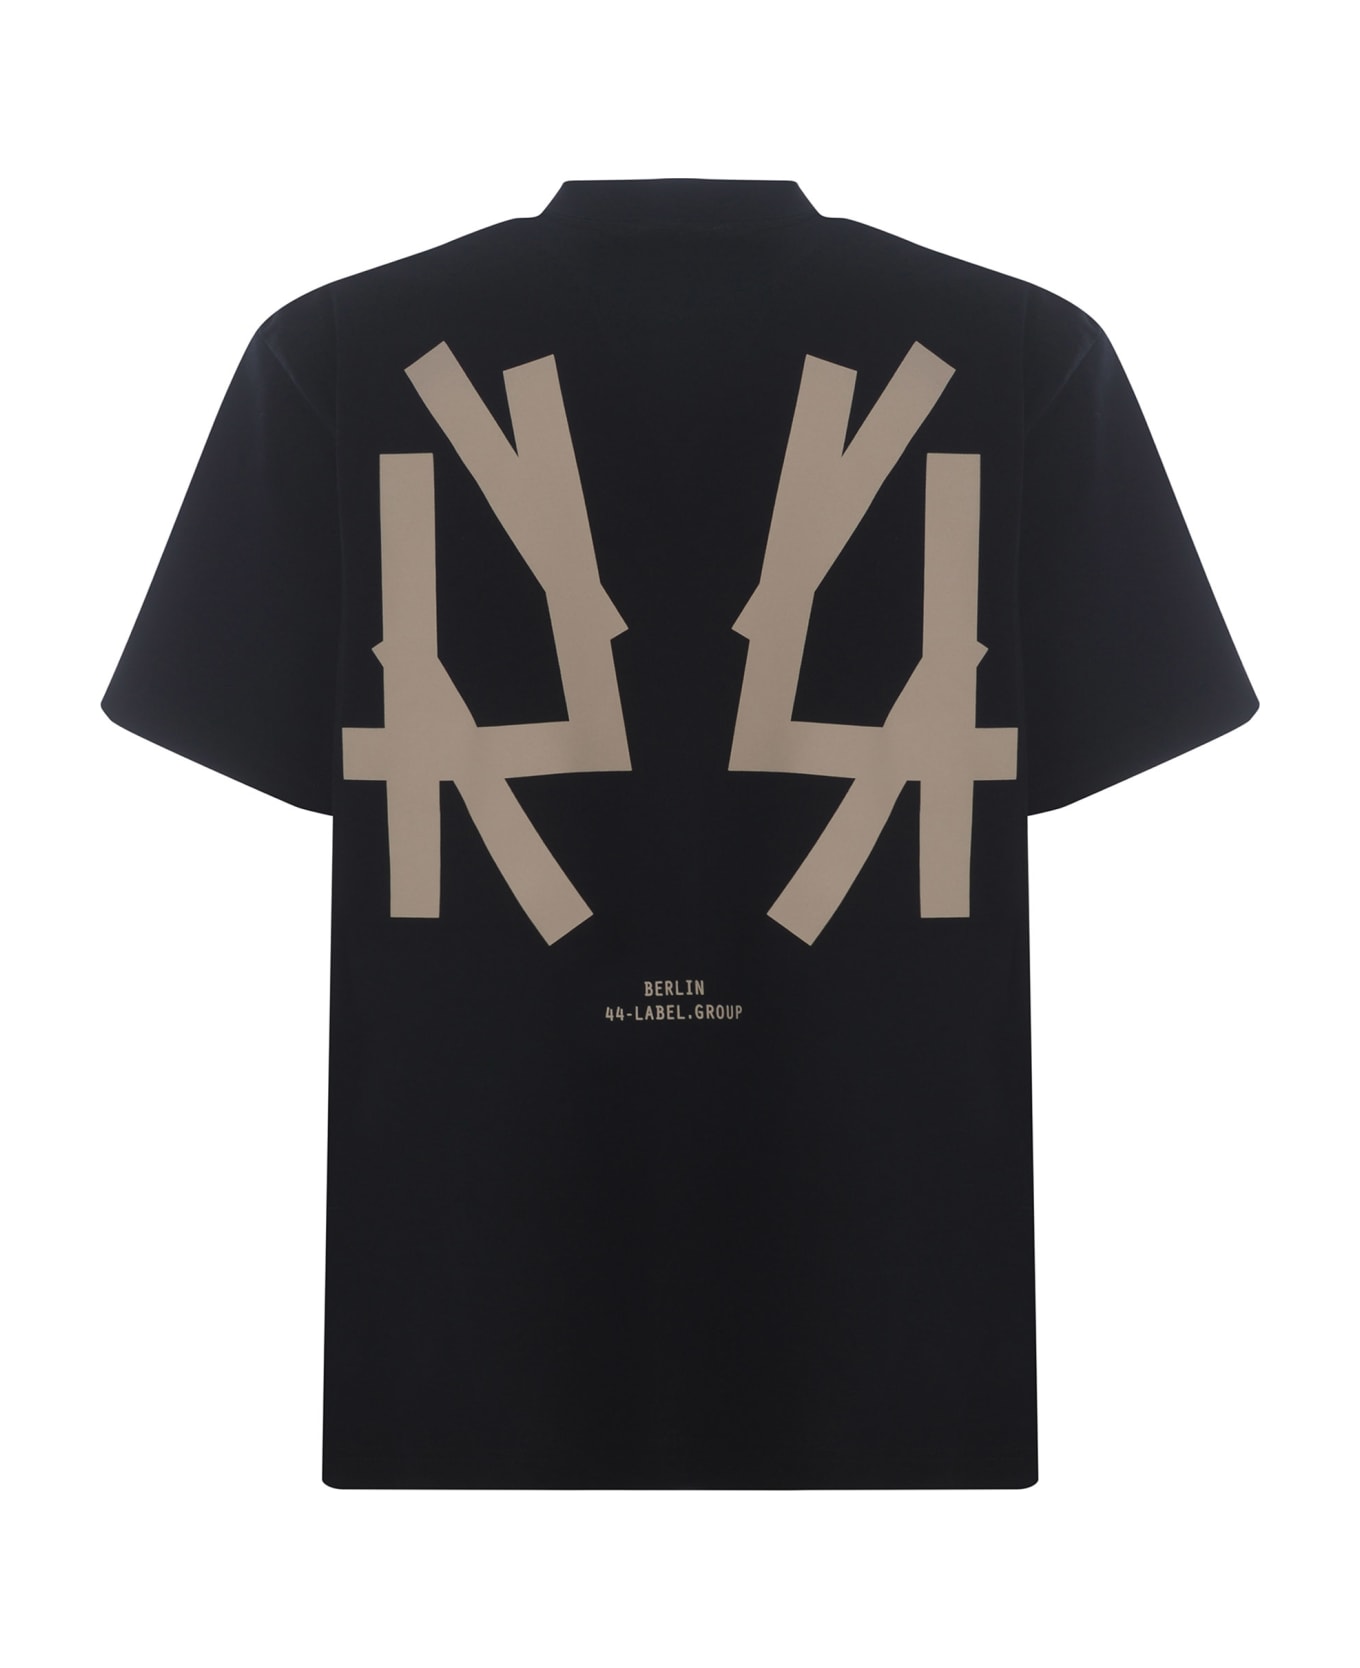 44 Label Group T-shirt 44label Group Made Of Cotton - Nero シャツ